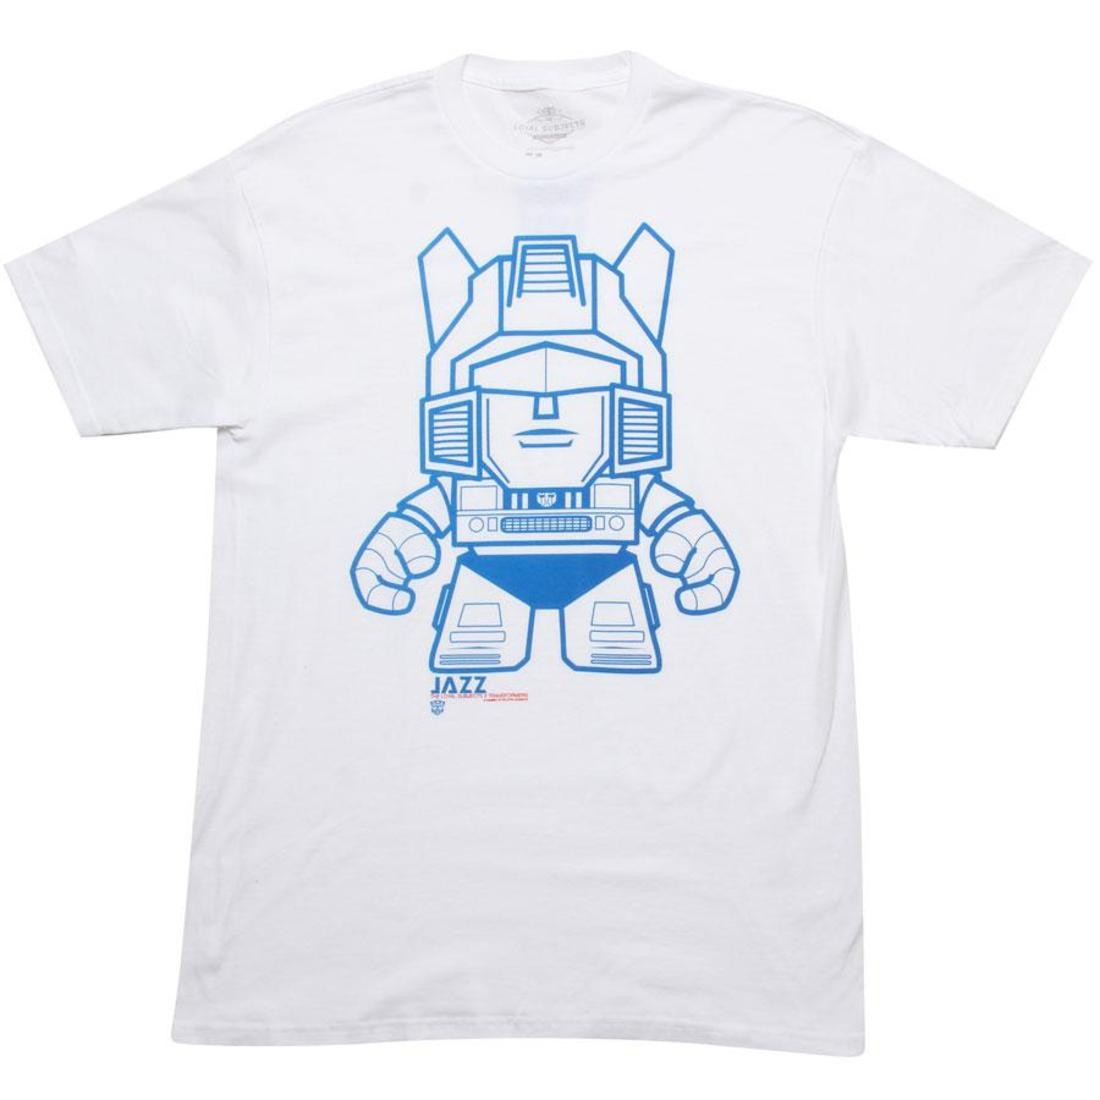 The Loyal Subjects x Transformers Jazz Tee (white)